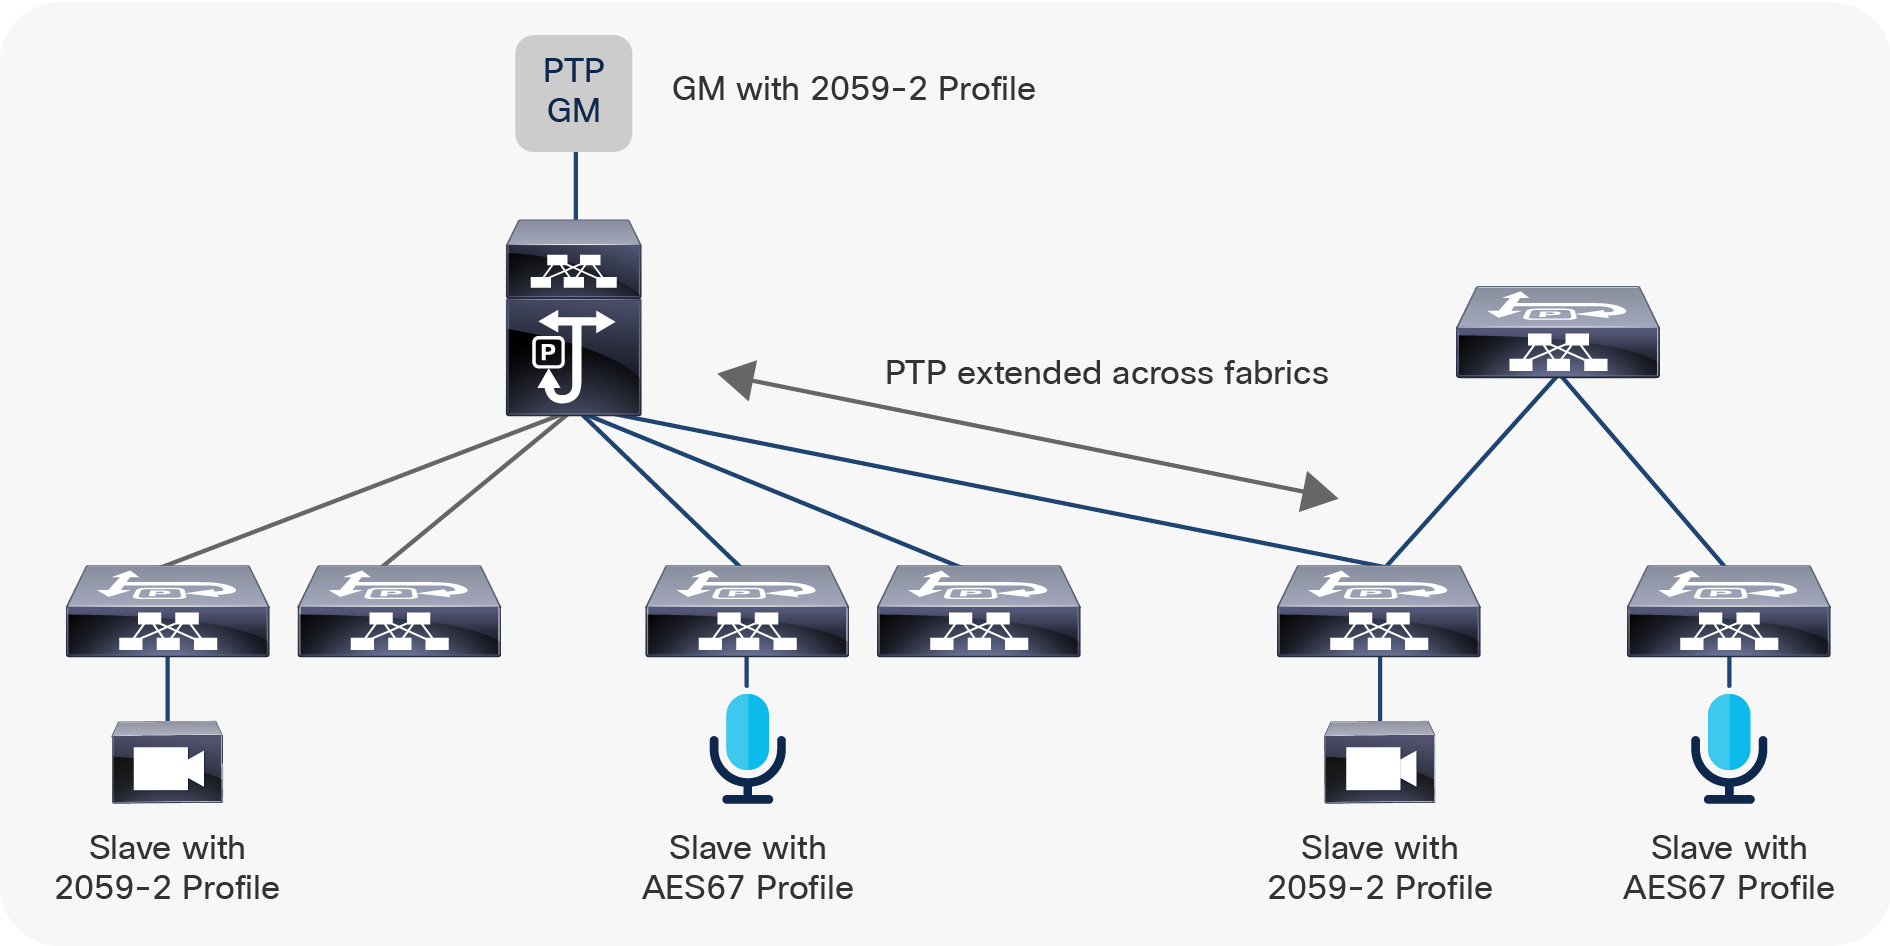 PTP and multi-site deployment